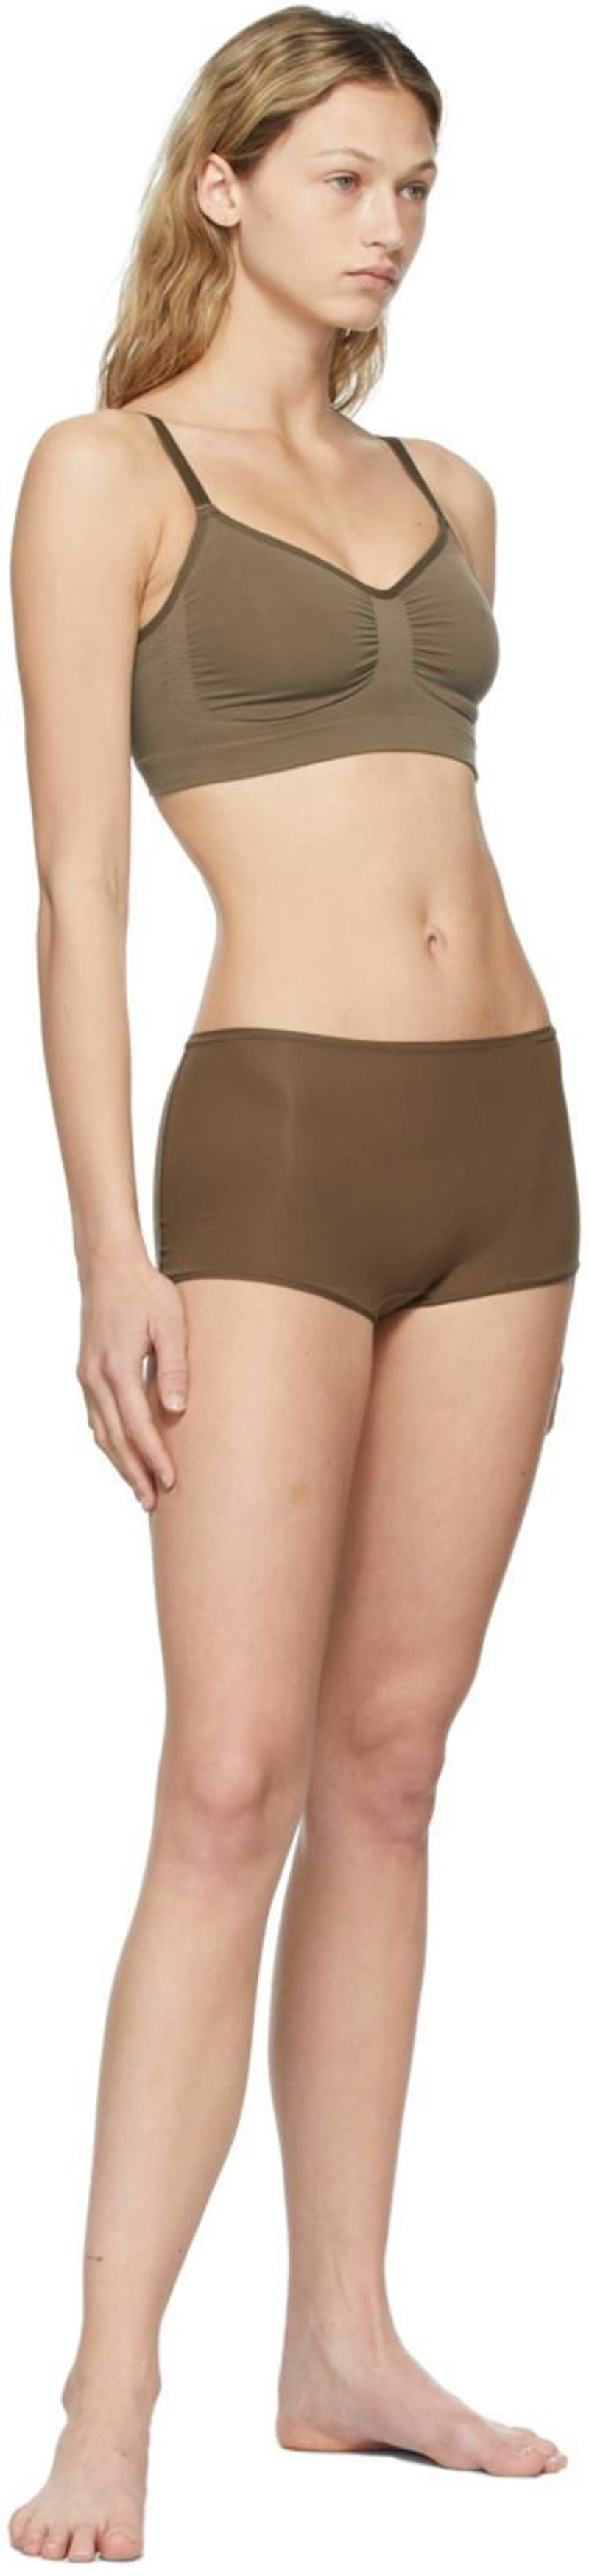 SSENSE's Post | Wearing: Skims Khaki Seamless Sculpting Bra In Oxide; Skims Brown Fits Everybody Boy Shorts In Oxide